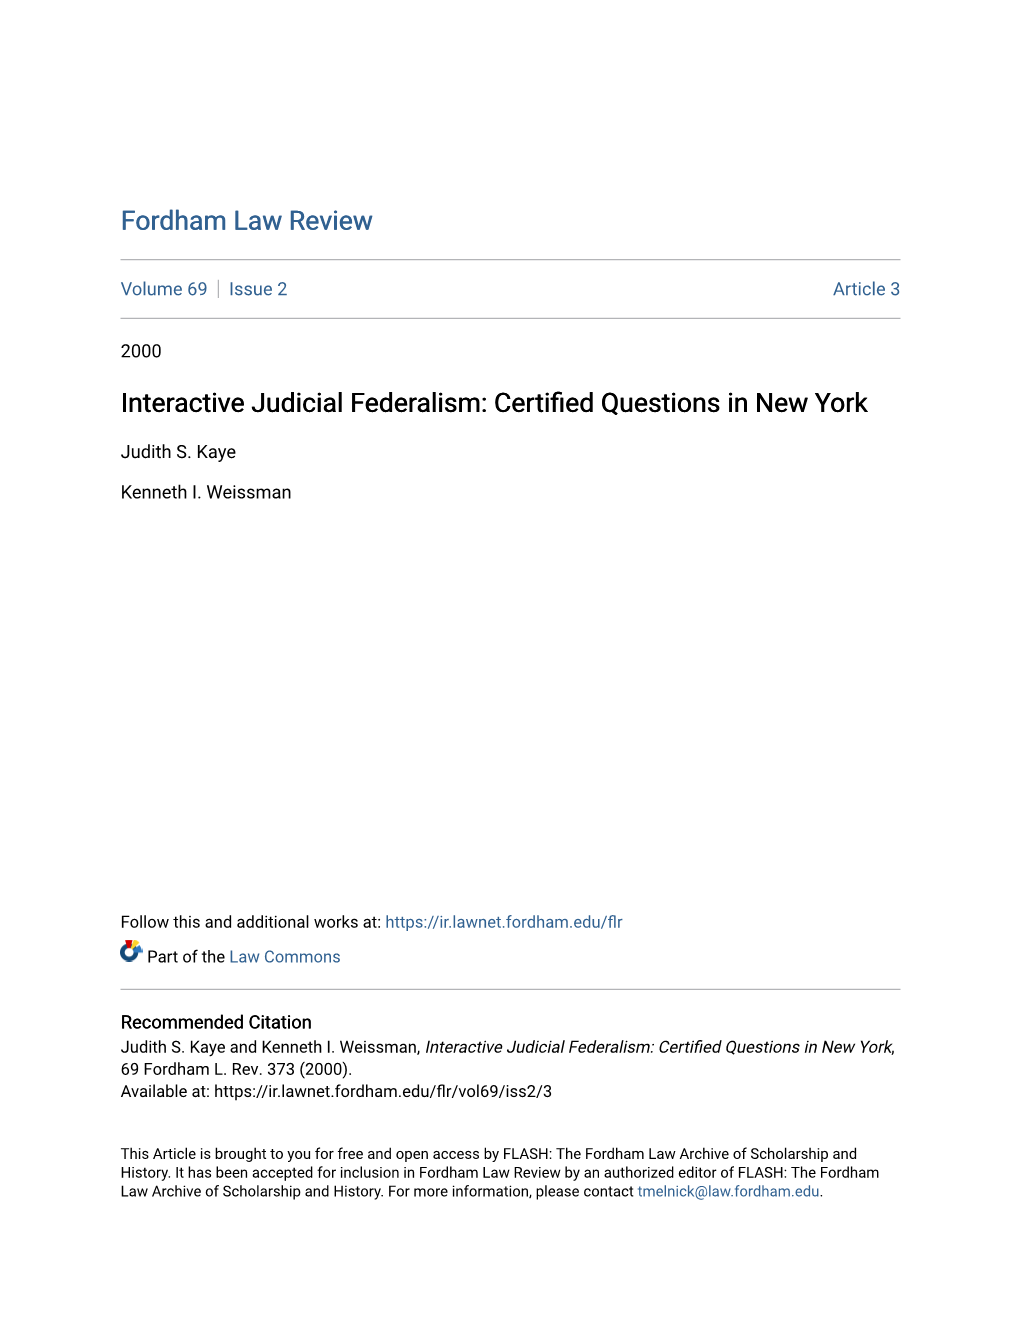 Certified Questions in New York